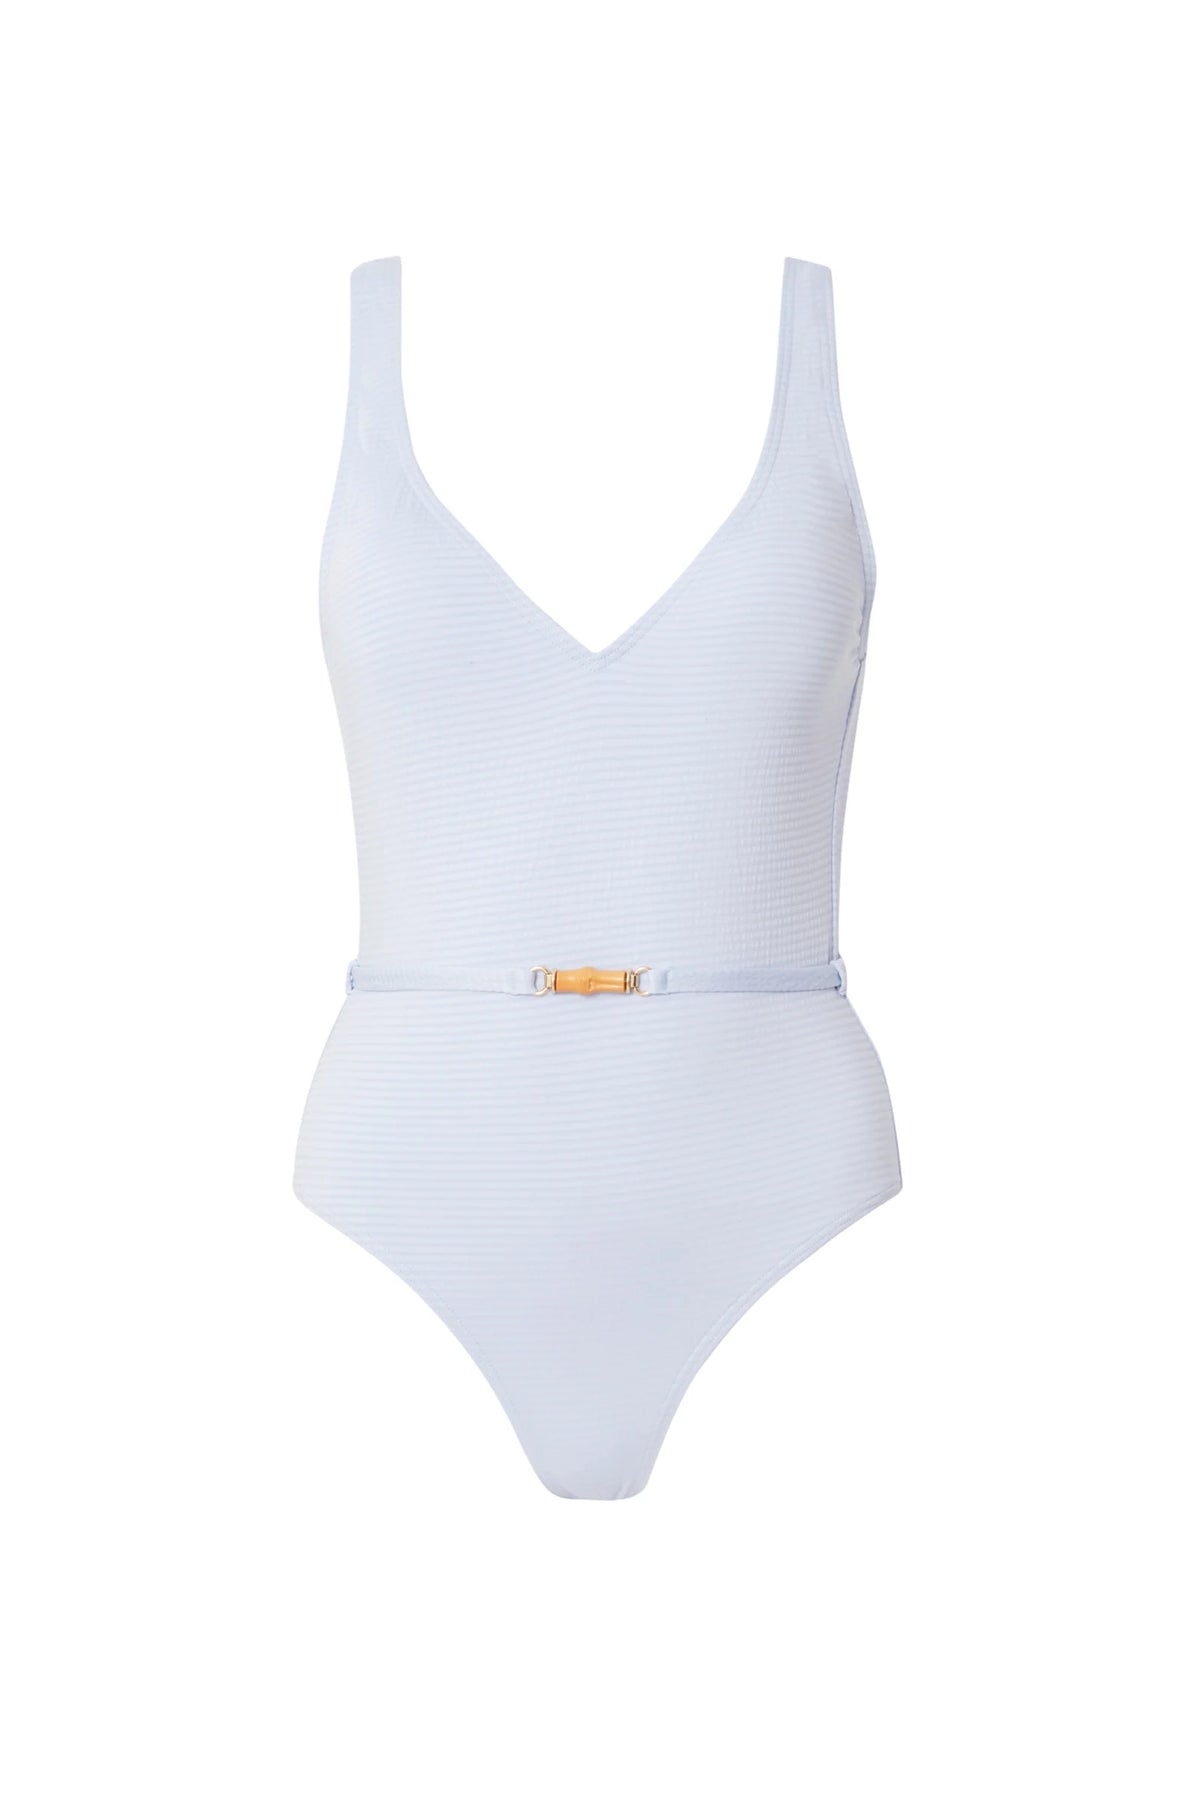 Baby blue V neck and back swimsuit in textured fabric with tie straps and belt